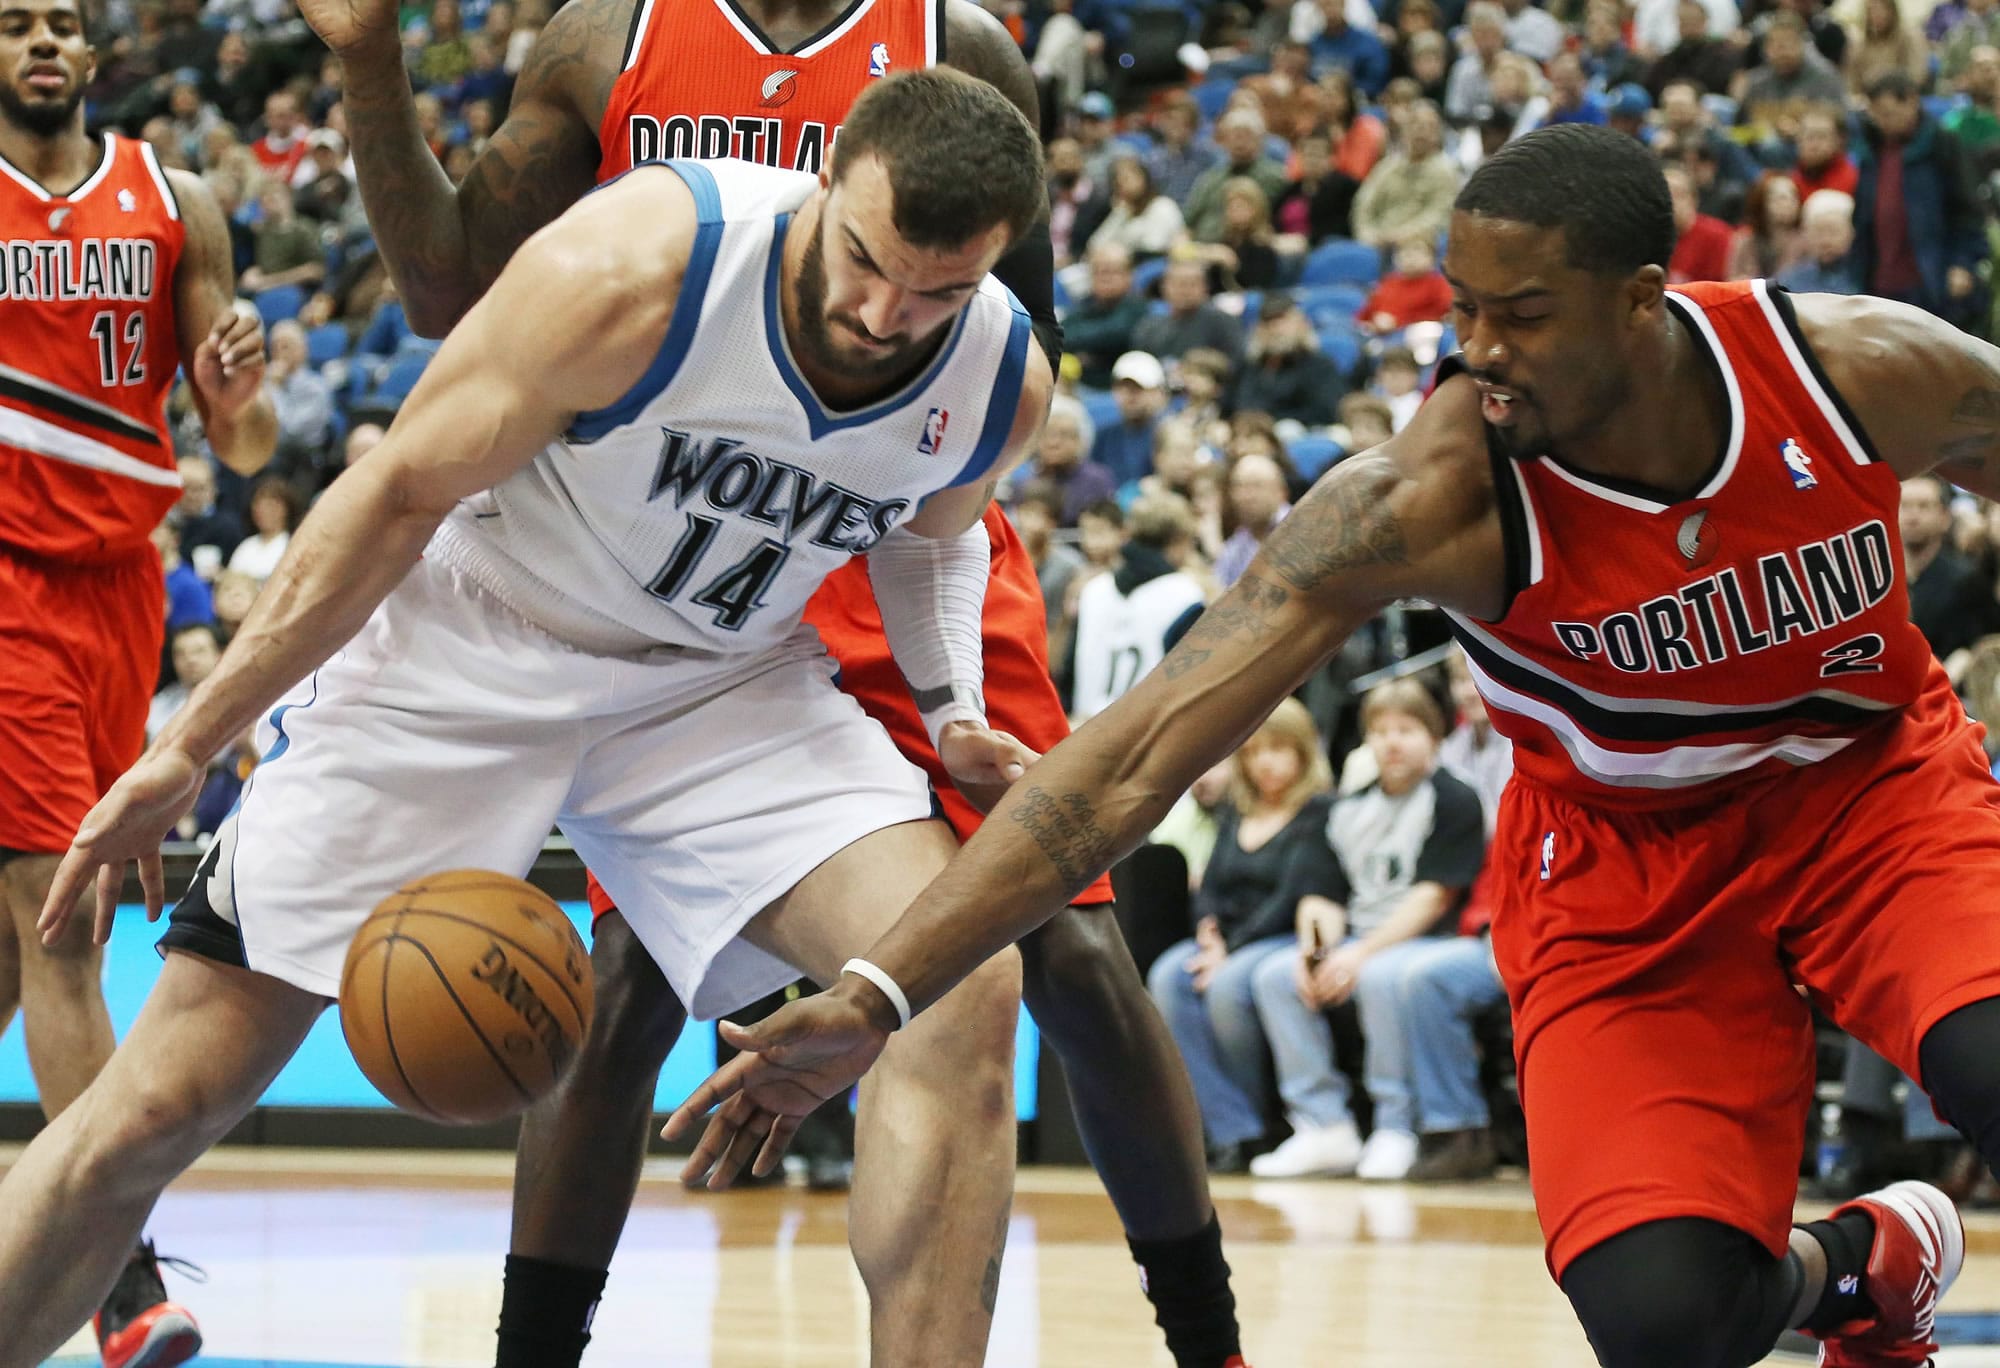 Portland Trail Blazers' Wesley Matthews, right, and Minnesota Timberwolves' Nikola Pekovic, go for the loose ball in the first quarter Saturday.